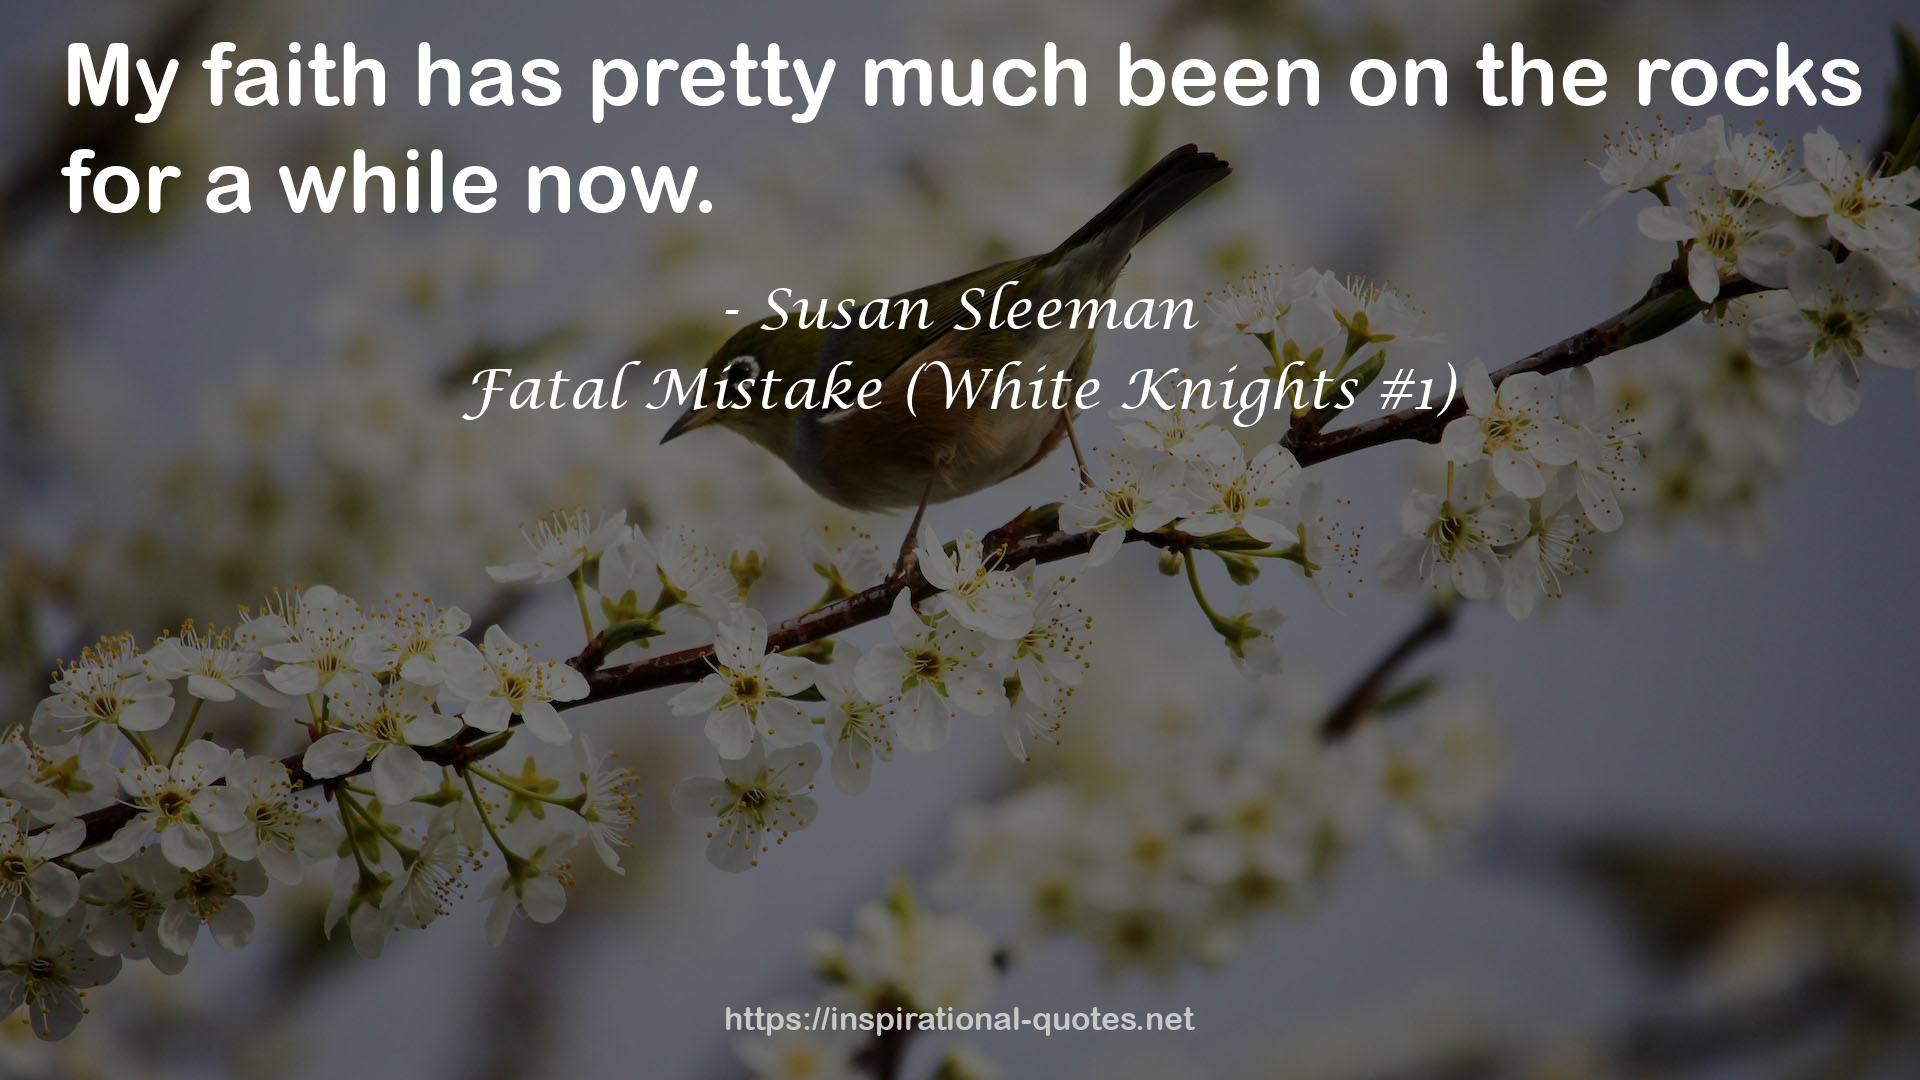 Fatal Mistake (White Knights #1) QUOTES